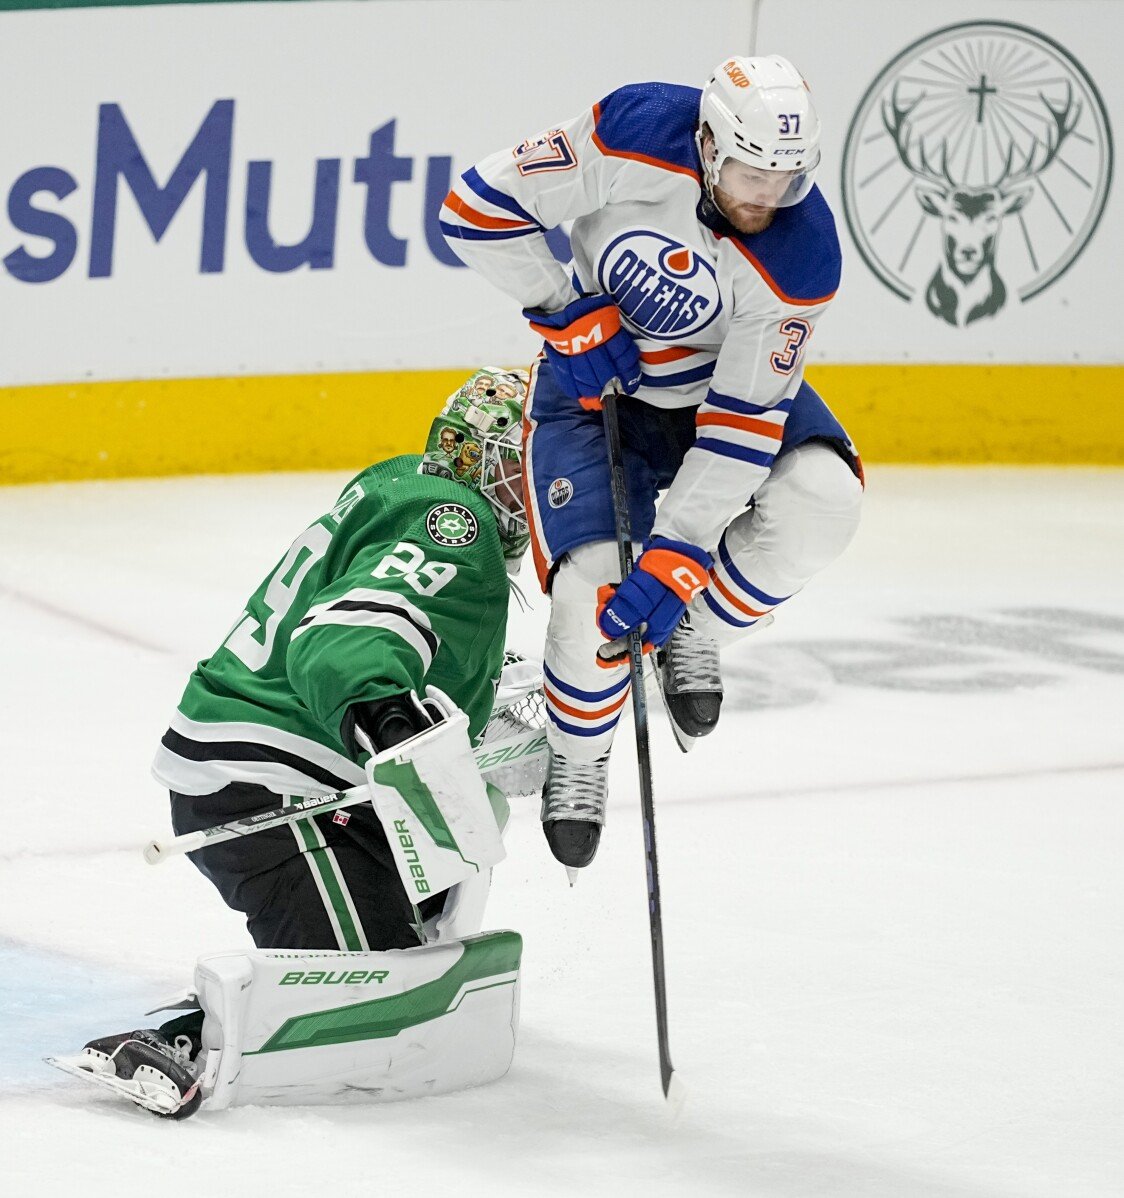 Dallas Stars suffer 7th consecutive Game 1 loss, fall 3-2 to Oilers in 2nd overtime in West final